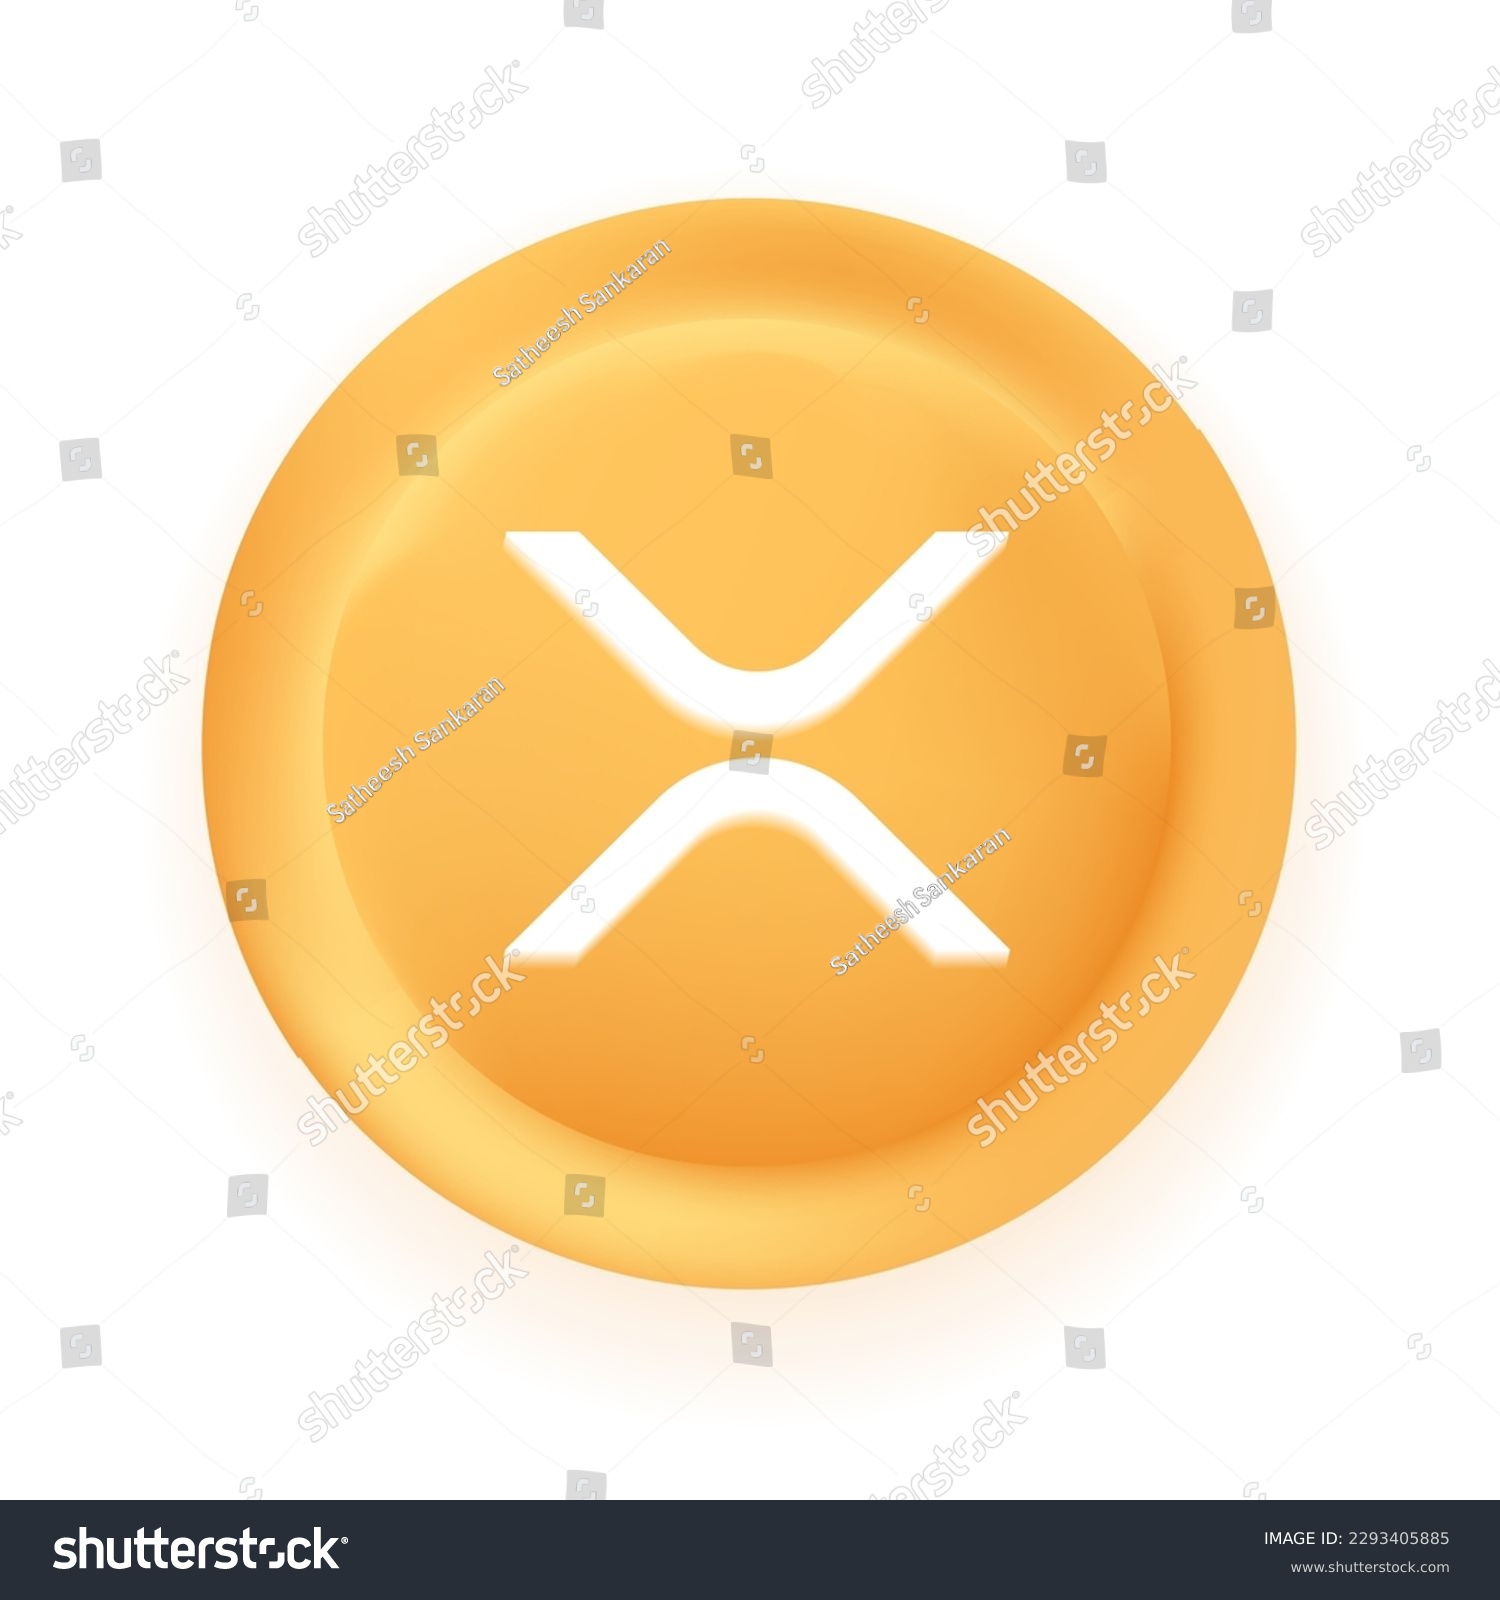 SVG of Xrp (XRP) crypto currency 3D coin vector illustration isolated on white background. Can be used as virtual money icon, logo, emblem, sticker and badge designs. svg